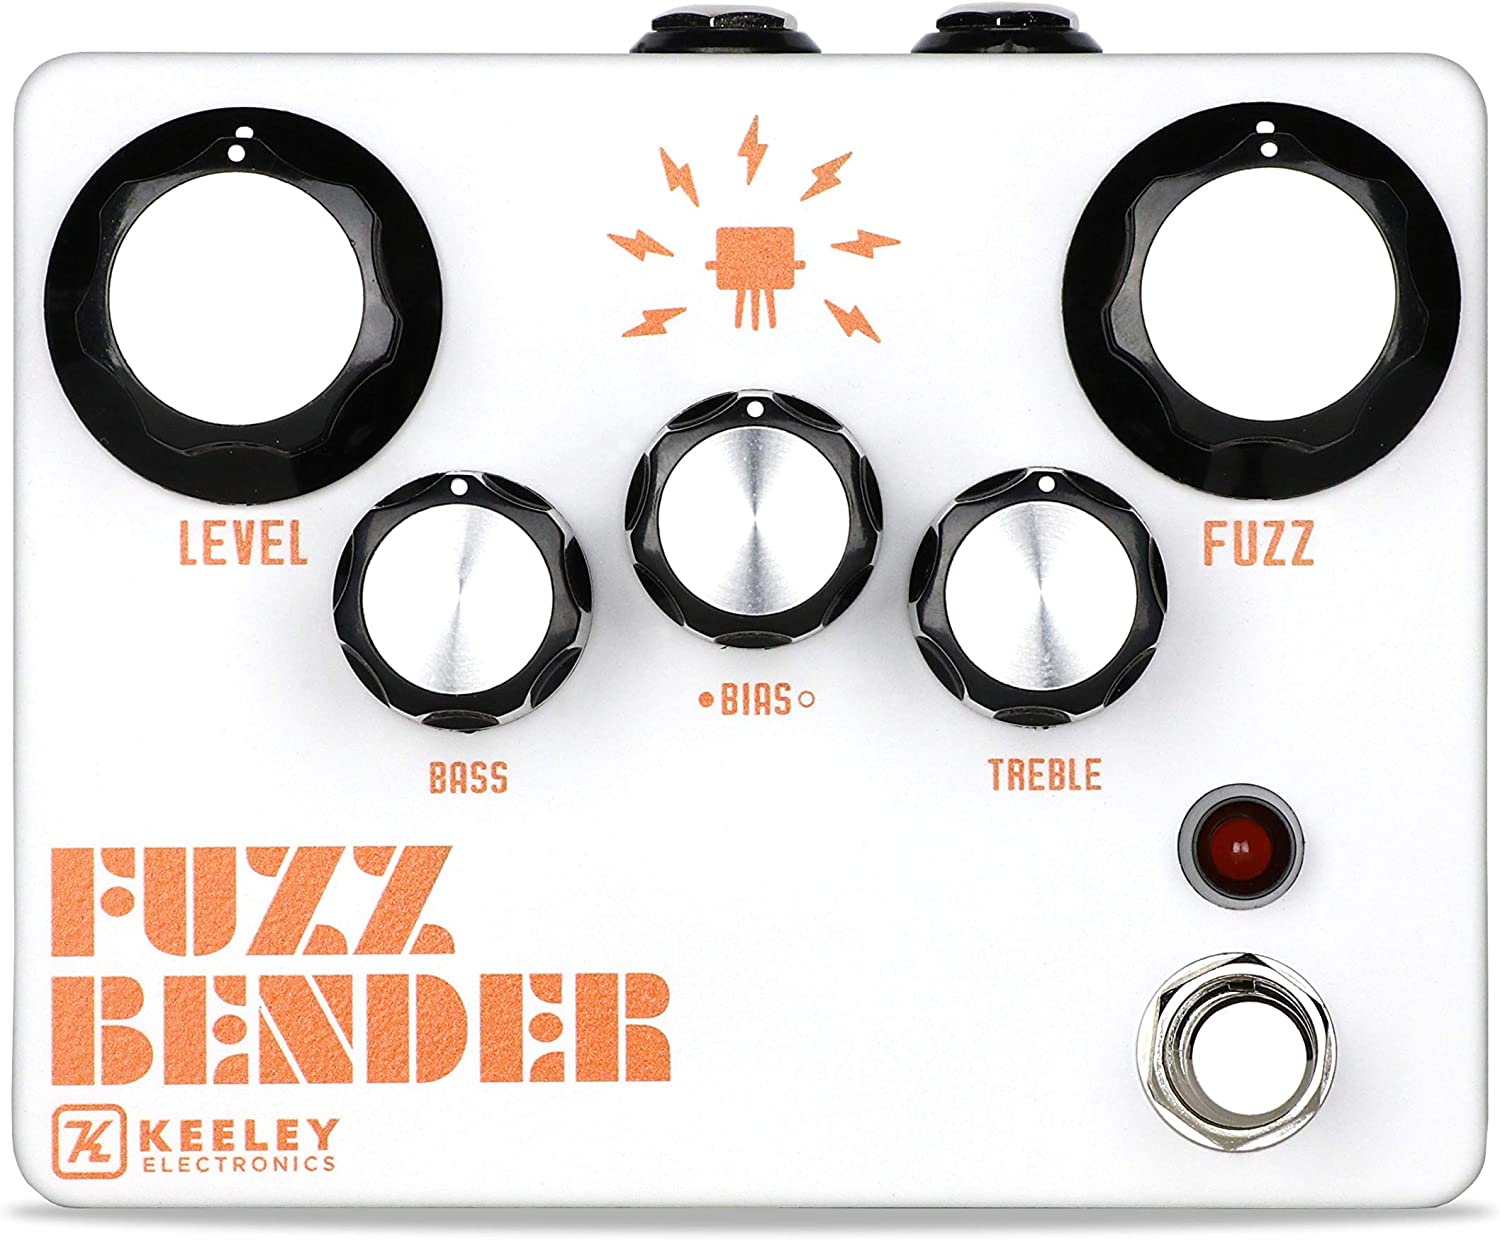 Keeley Fuzz Bender Pedal on a white background